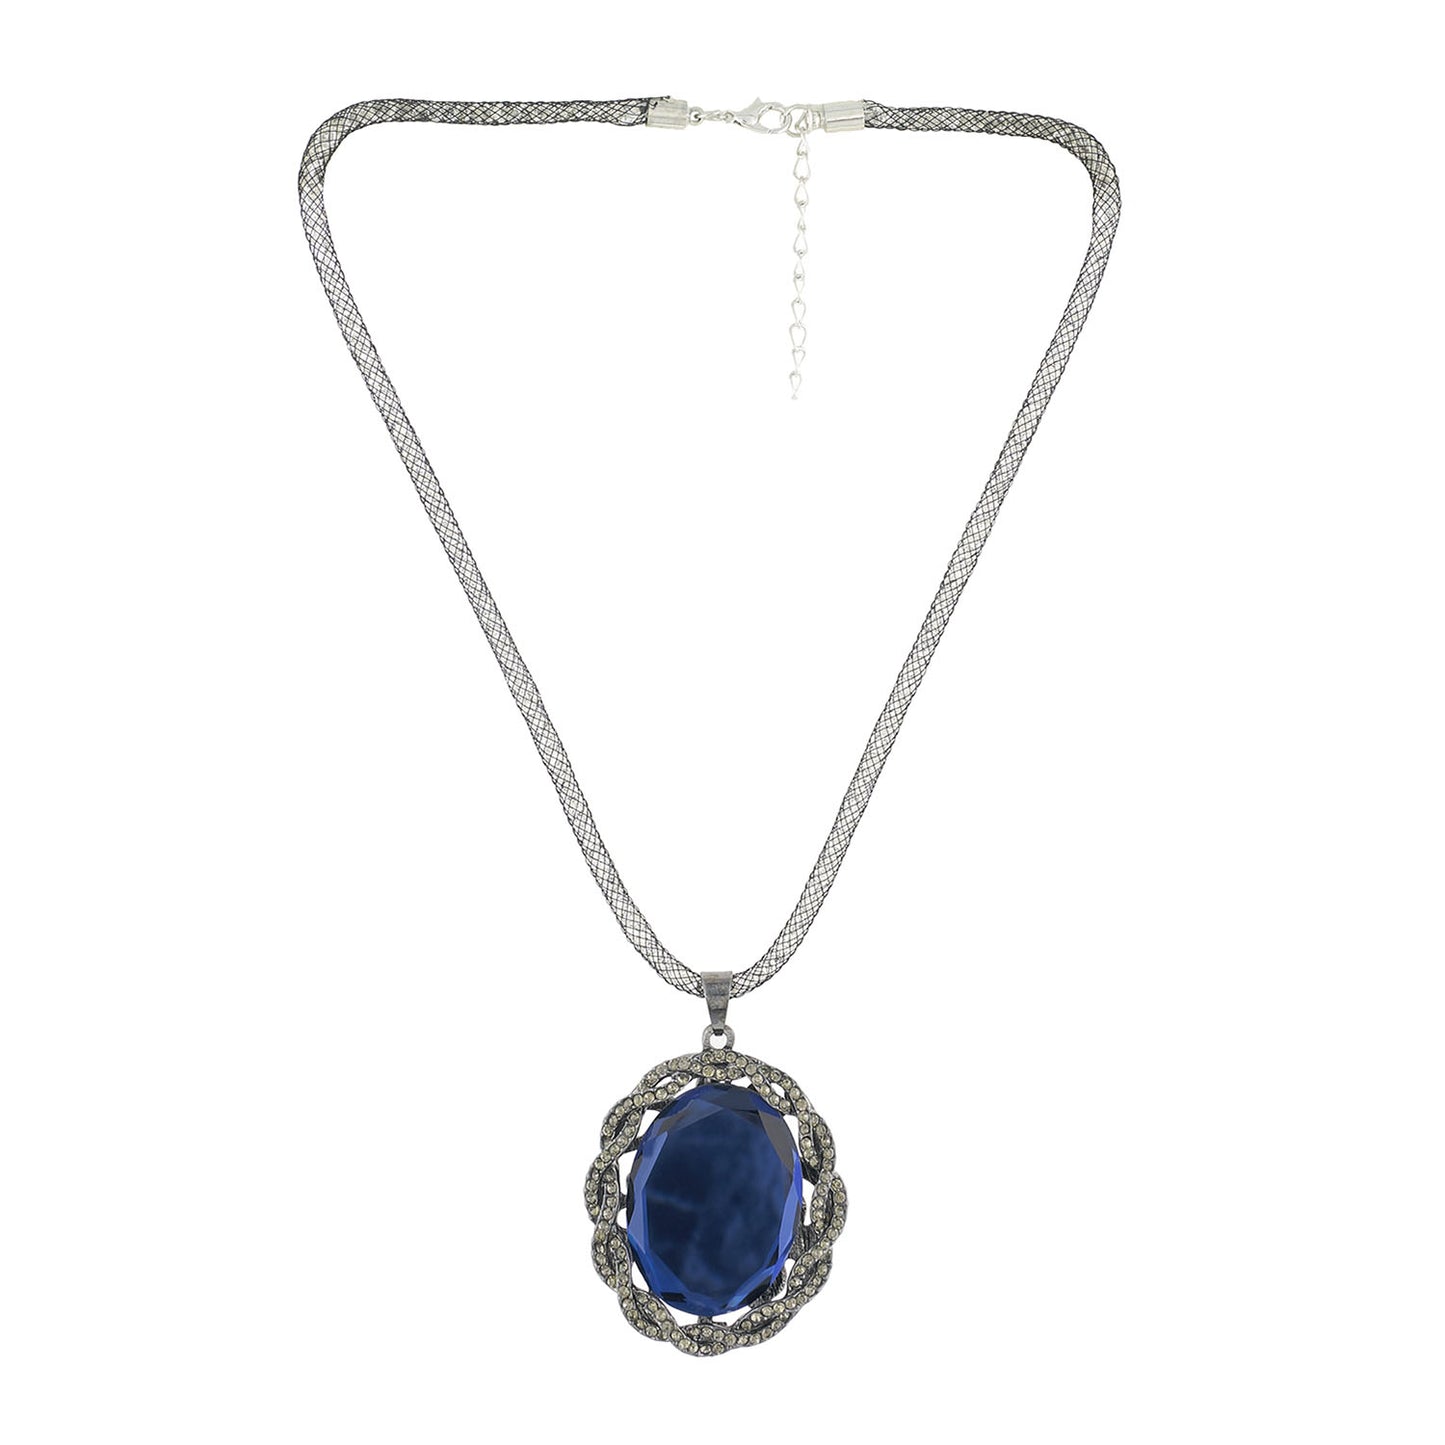 Grey and Blue Colour Drop Shaped Shape Alloy Pendant with Chain for Girls and Women